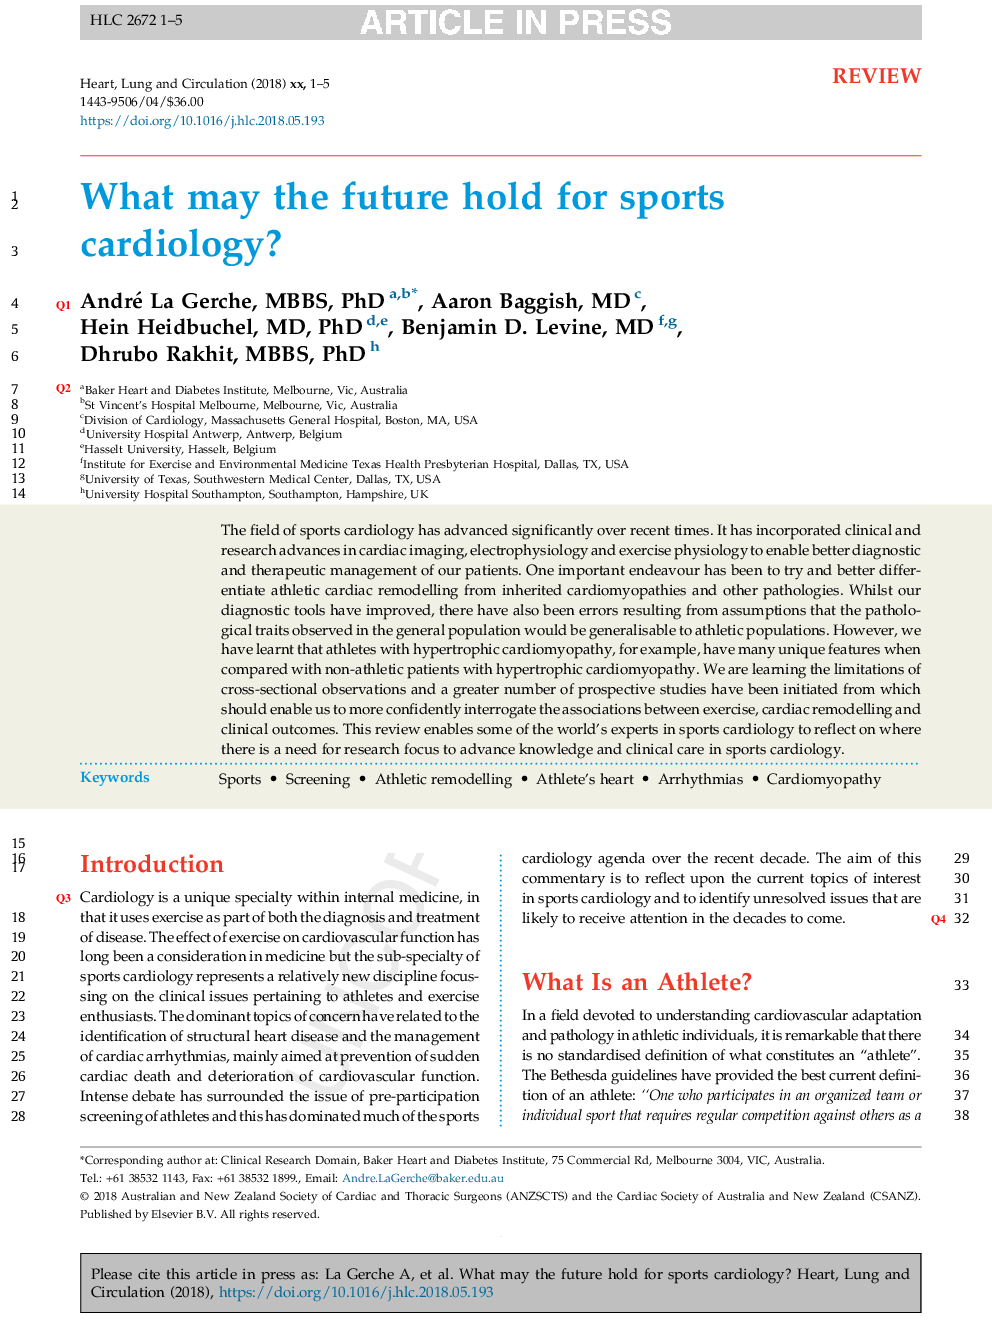 What May the Future Hold for Sports Cardiology?